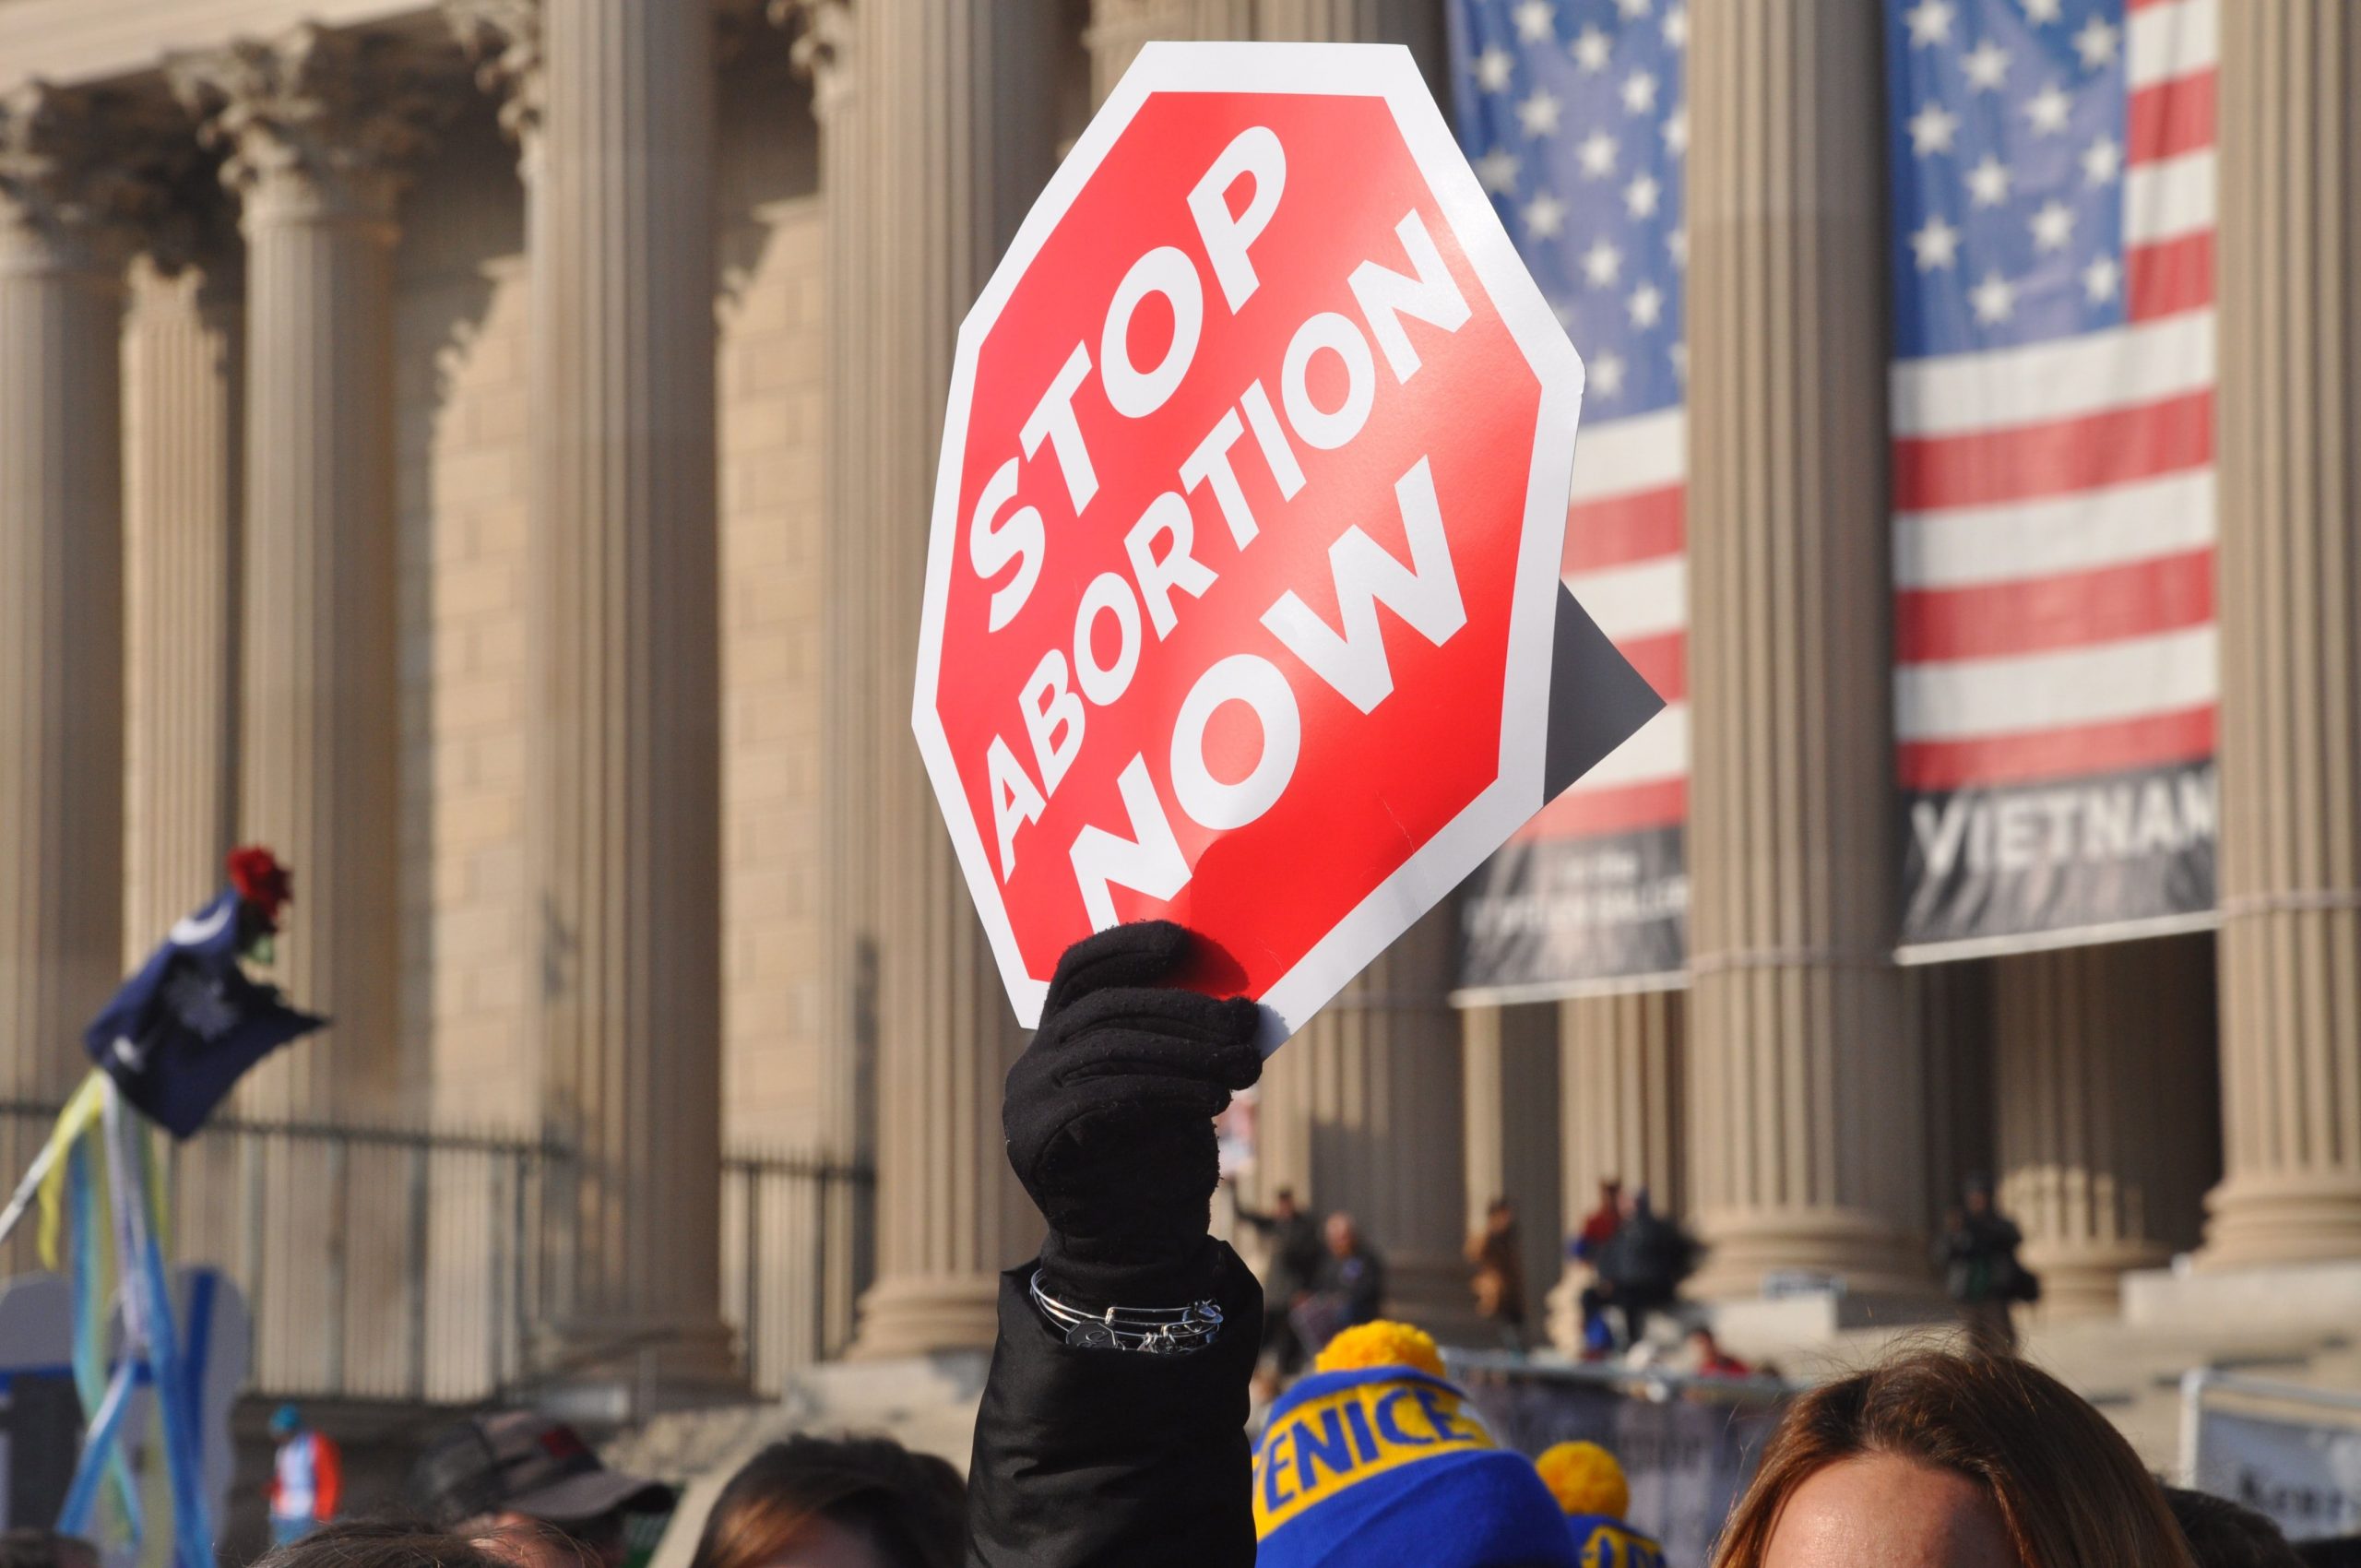 Oklahoma bans abortions after 6 weeks, effective immediately